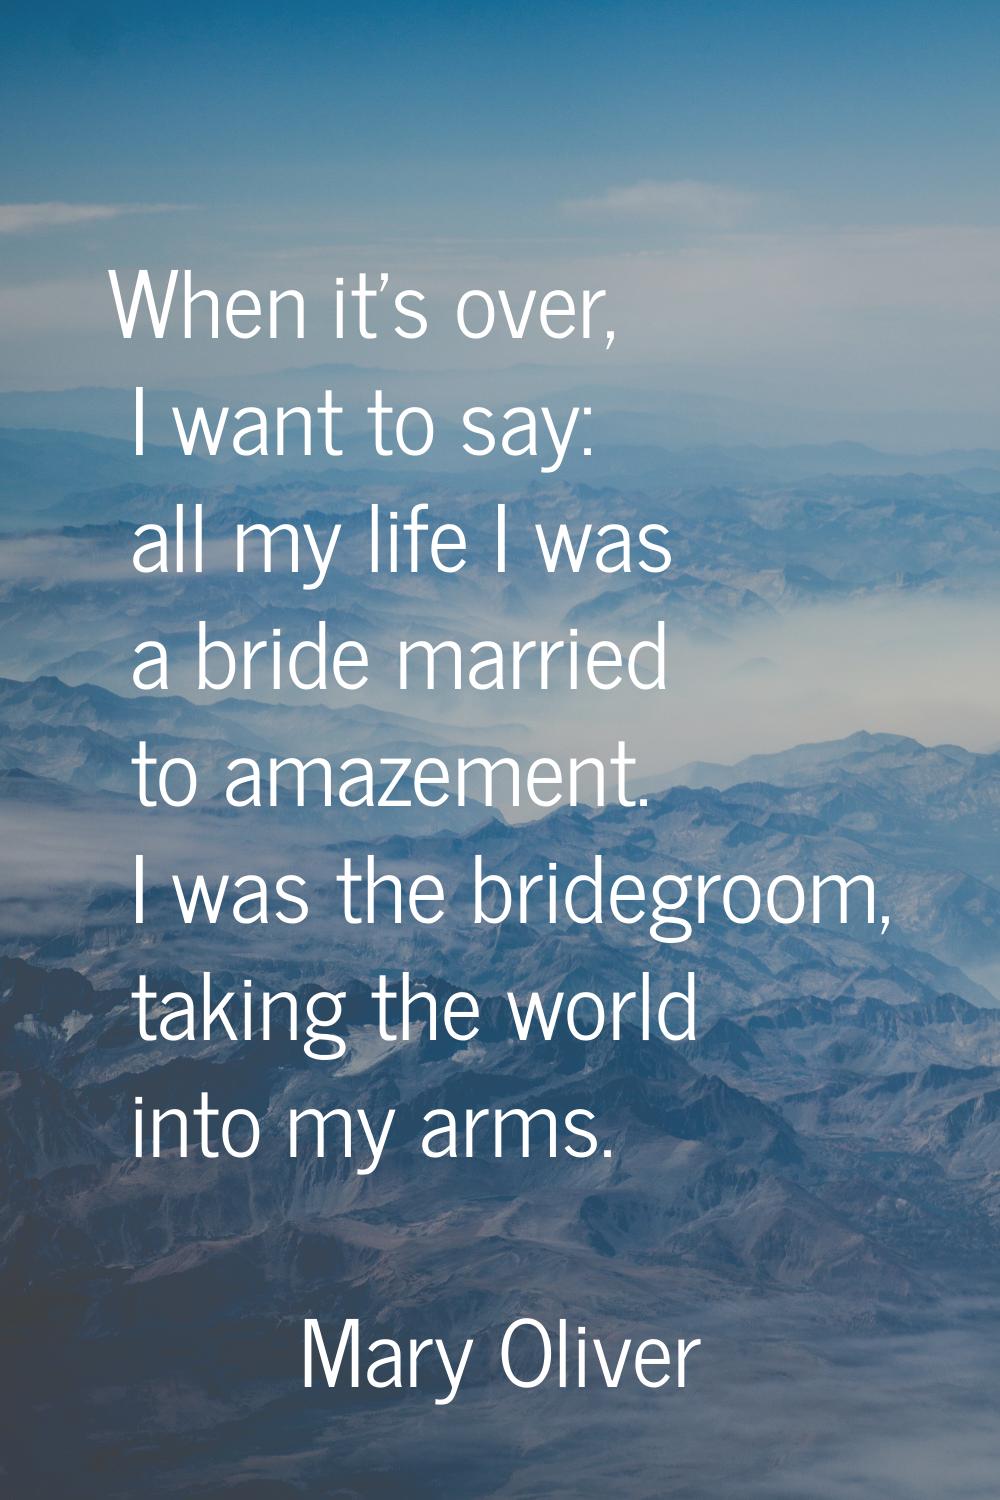 When it's over, I want to say: all my life I was a bride married to amazement. I was the bridegroom